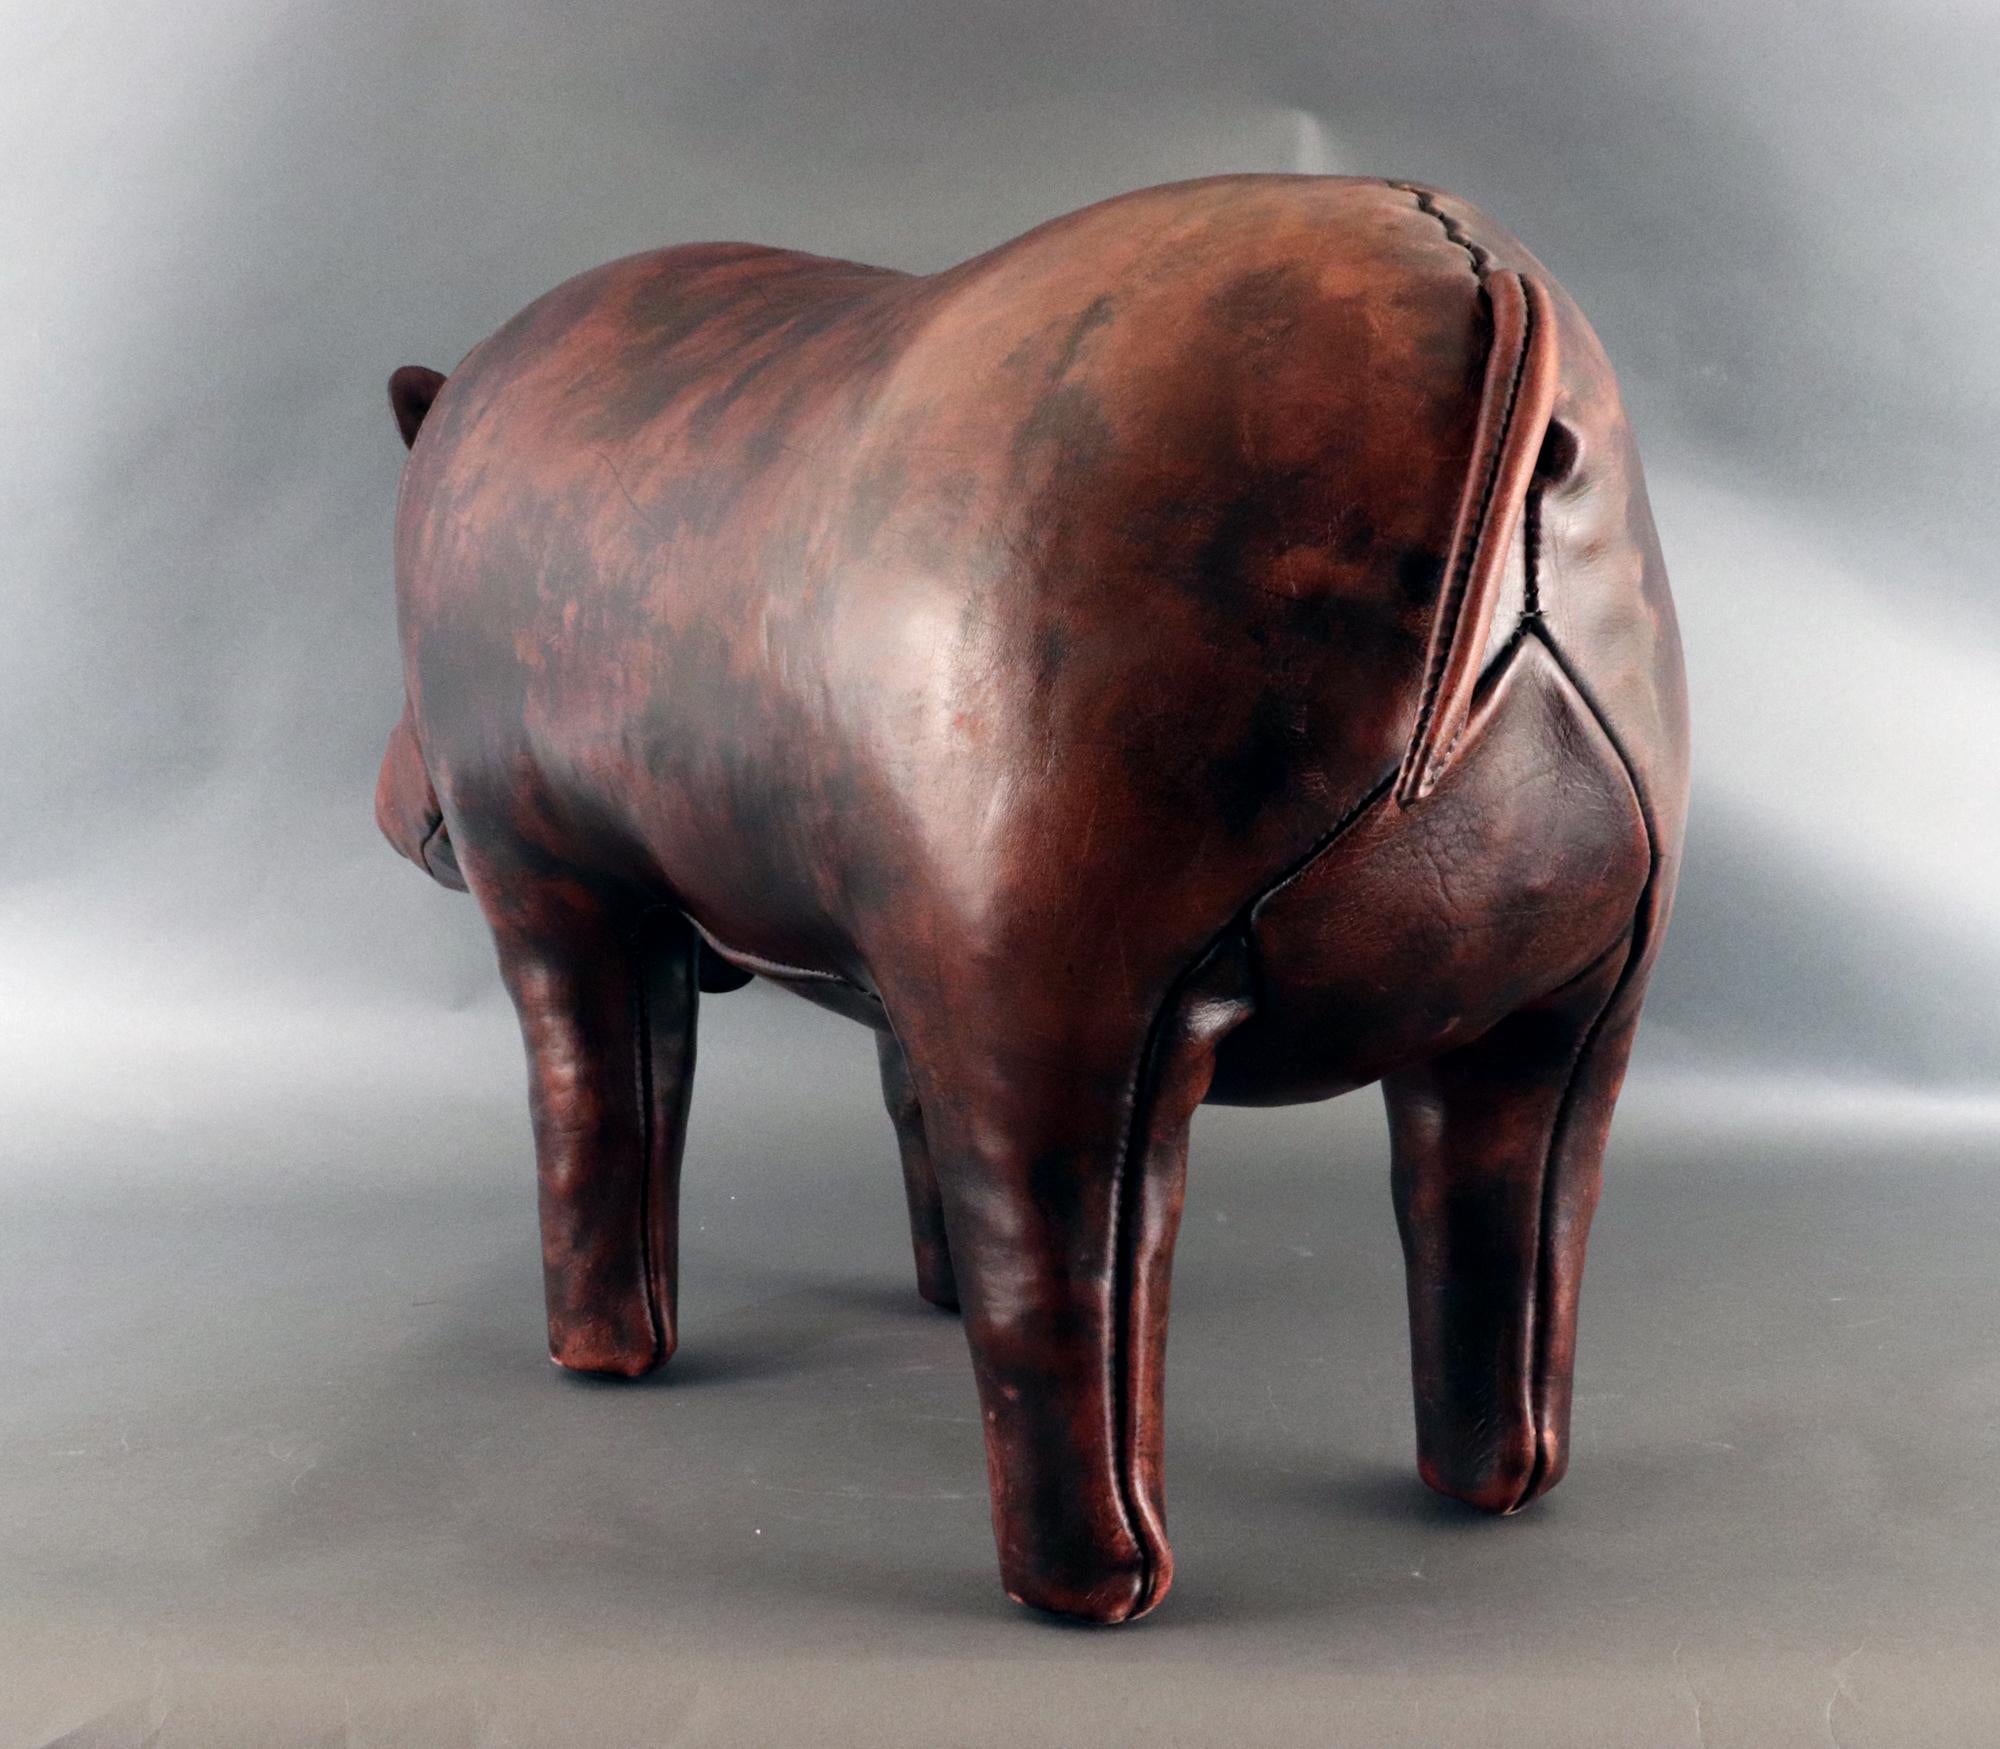 Mid-Century Modern English Leather Footstool in the form of a Hippo, Jancraft for Dimitri Omersa For Sale